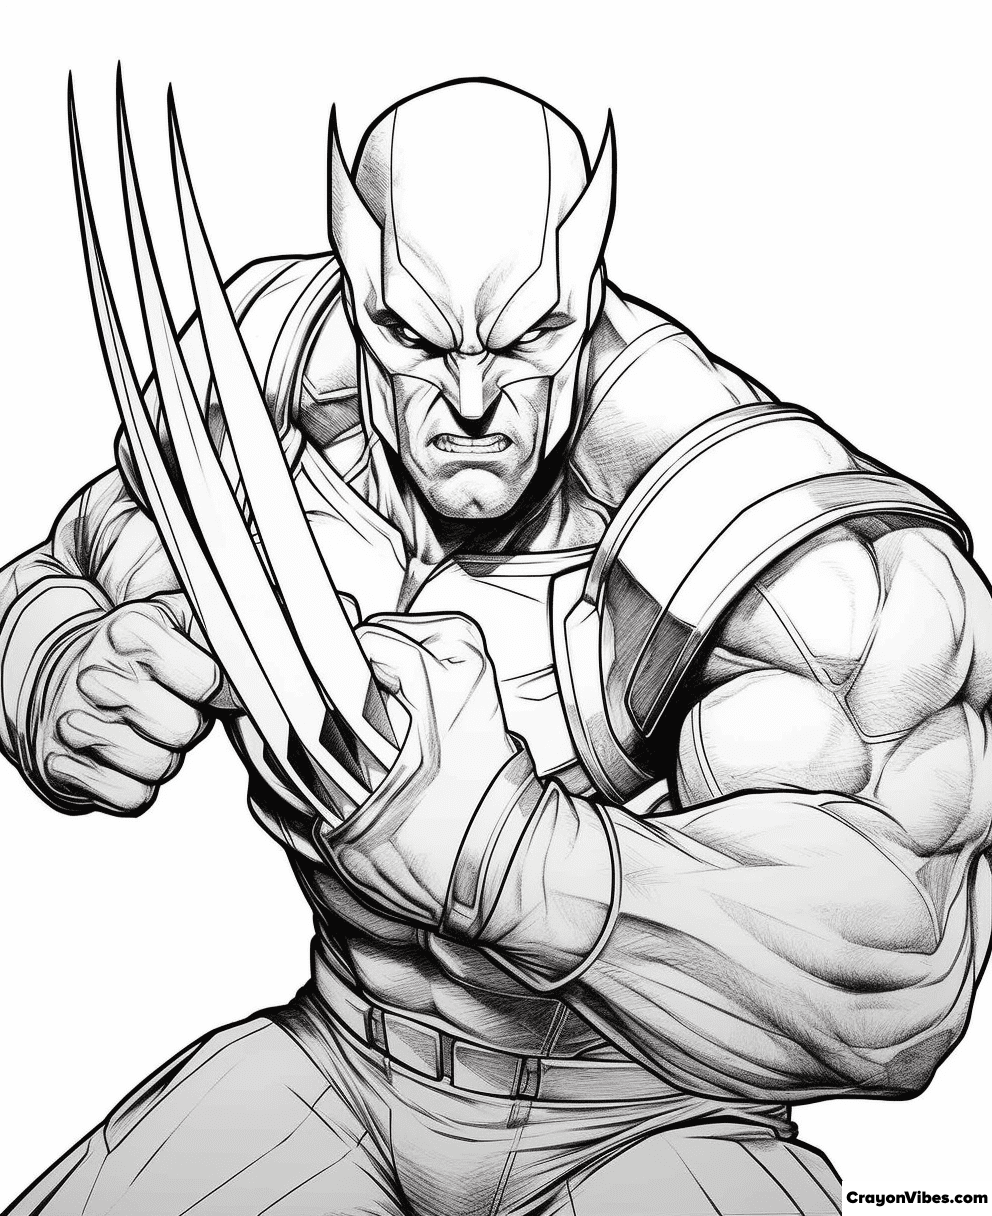 Wolverine Coloring Pages Free Printables for Kids and Adults